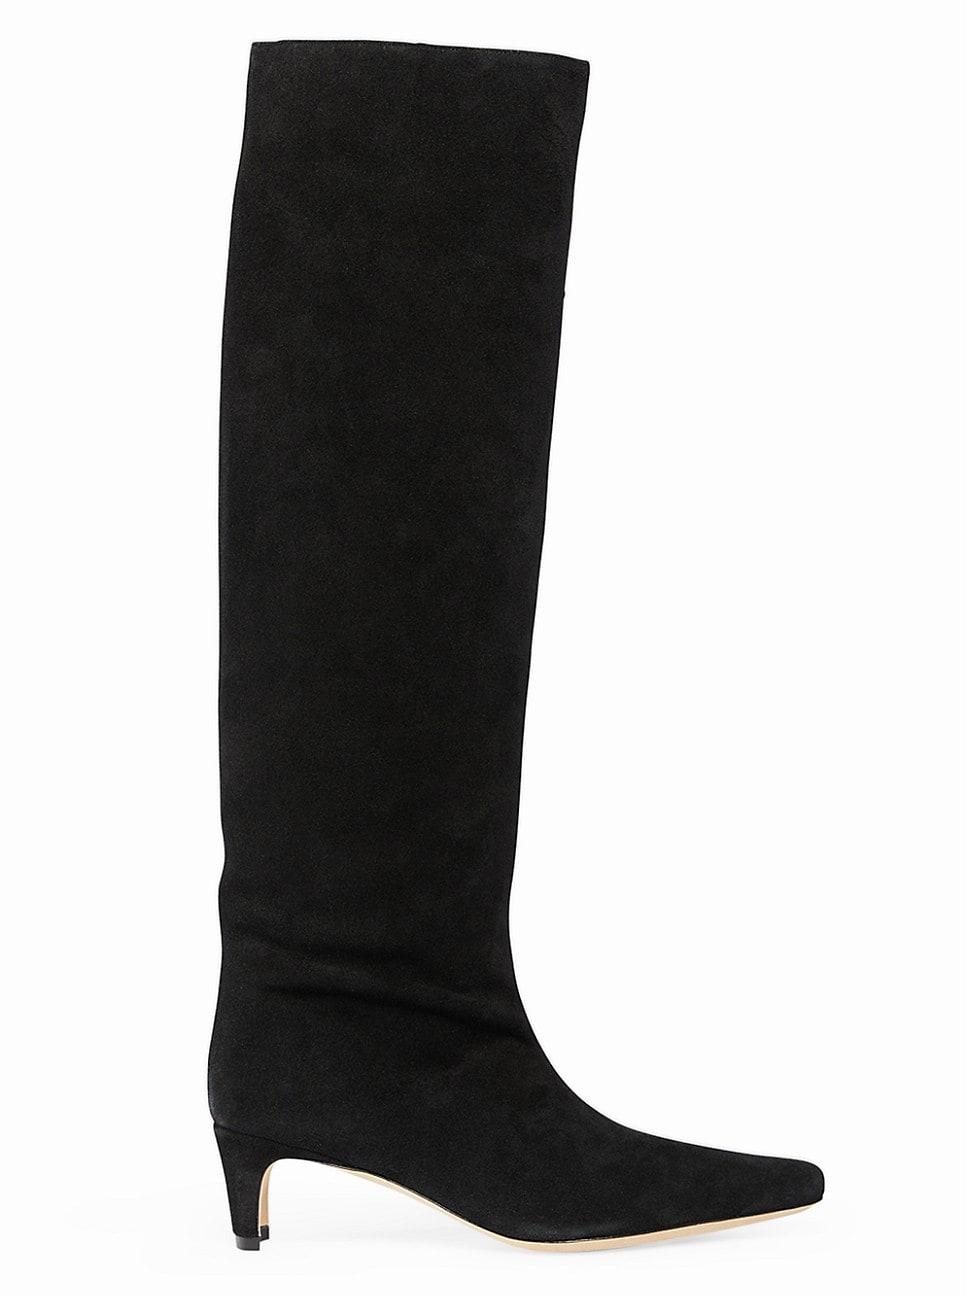 STAUD Wally Suede Knee-high Boots in Black | Lyst